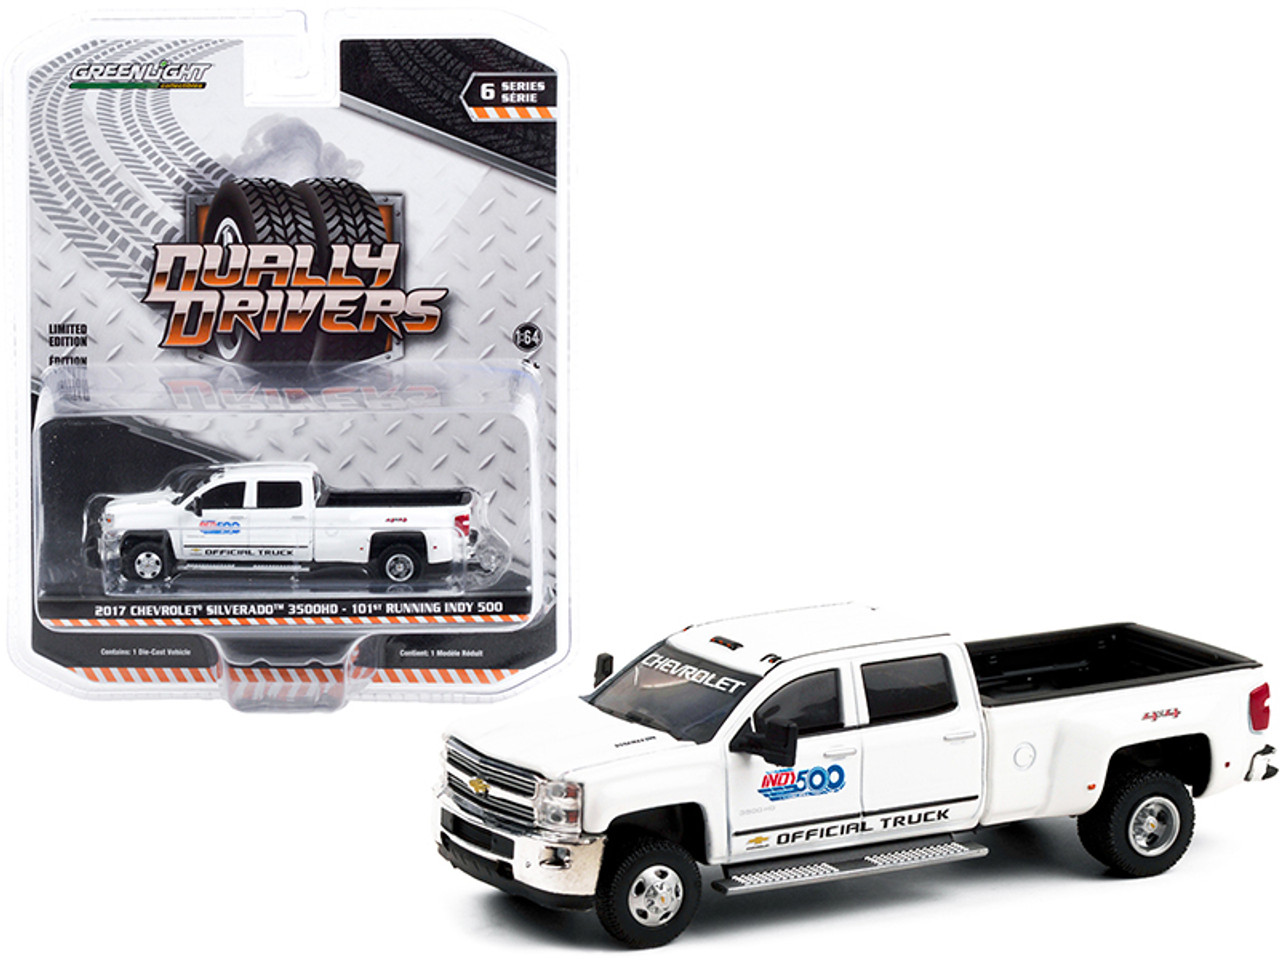 2017 Chevrolet Silverado 3500HD Dually Pickup Truck White "101st Running Indy 500" Presented by PennGrade Motor Oil Official Truck "Dually Drivers" Series 6 1/64 Diecast Model Car by Greenlight